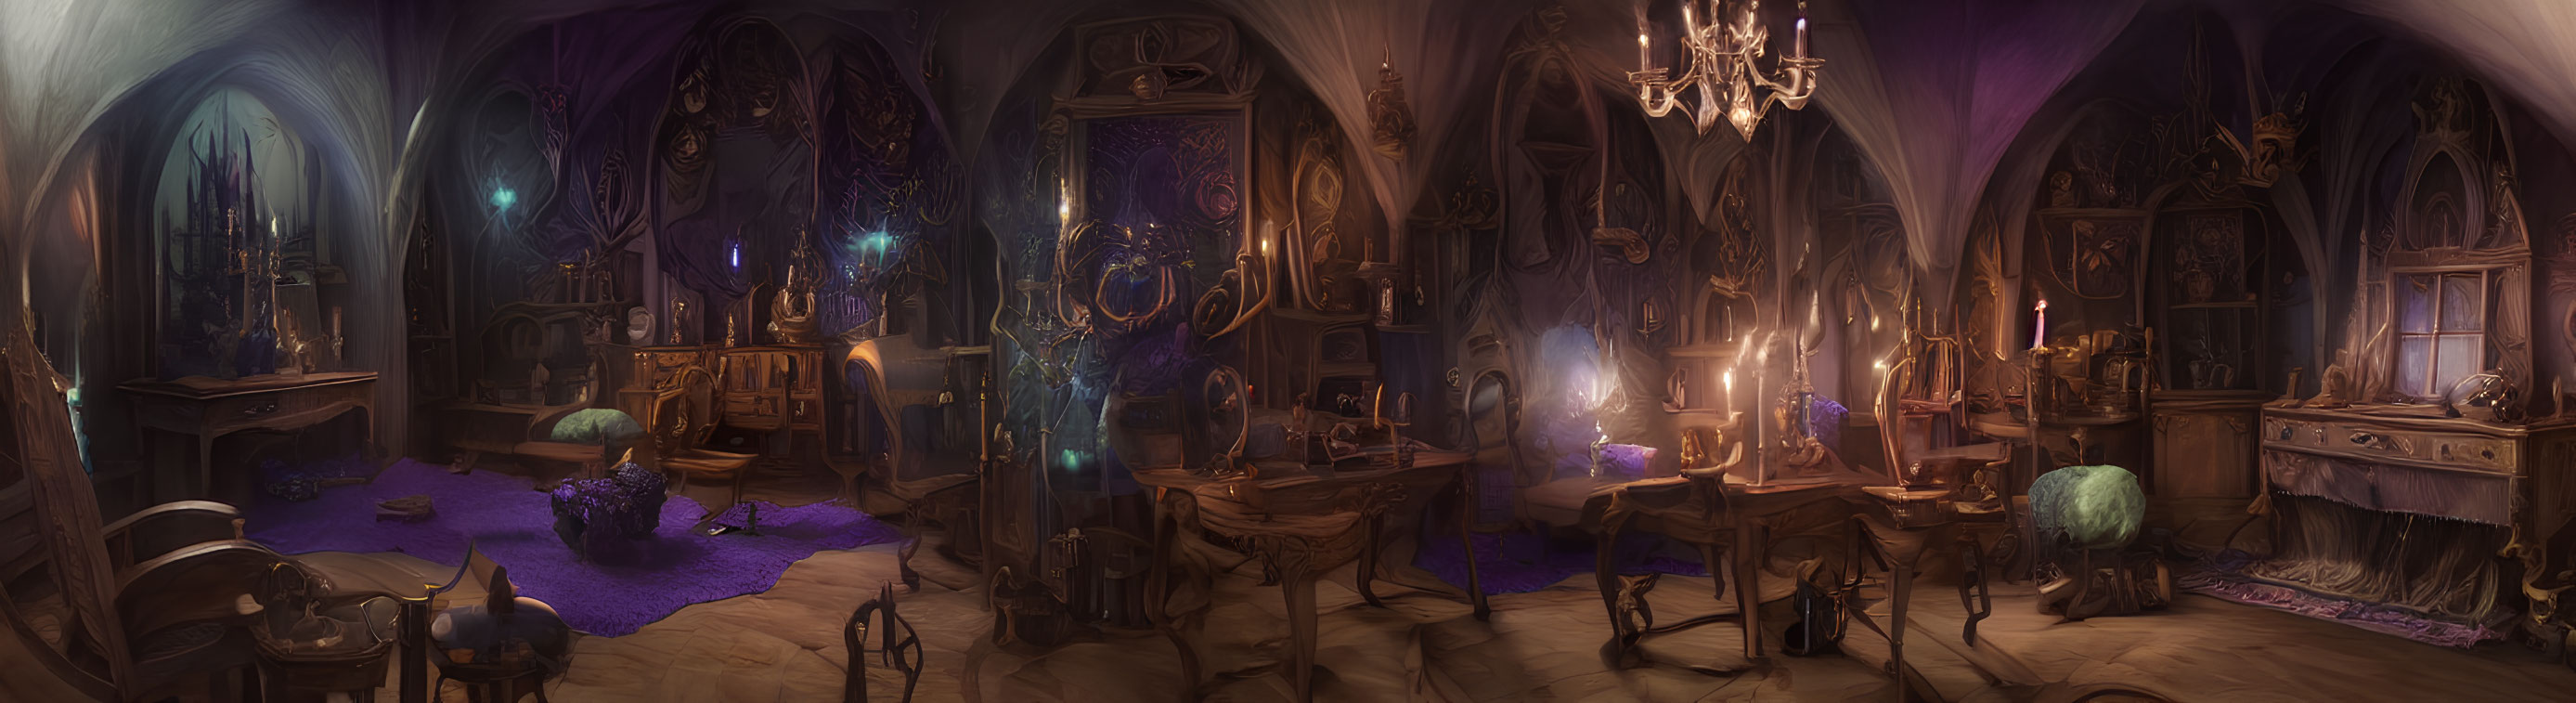 Mystical room with magical artifacts, glowing orbs, books, candles, and ritual table